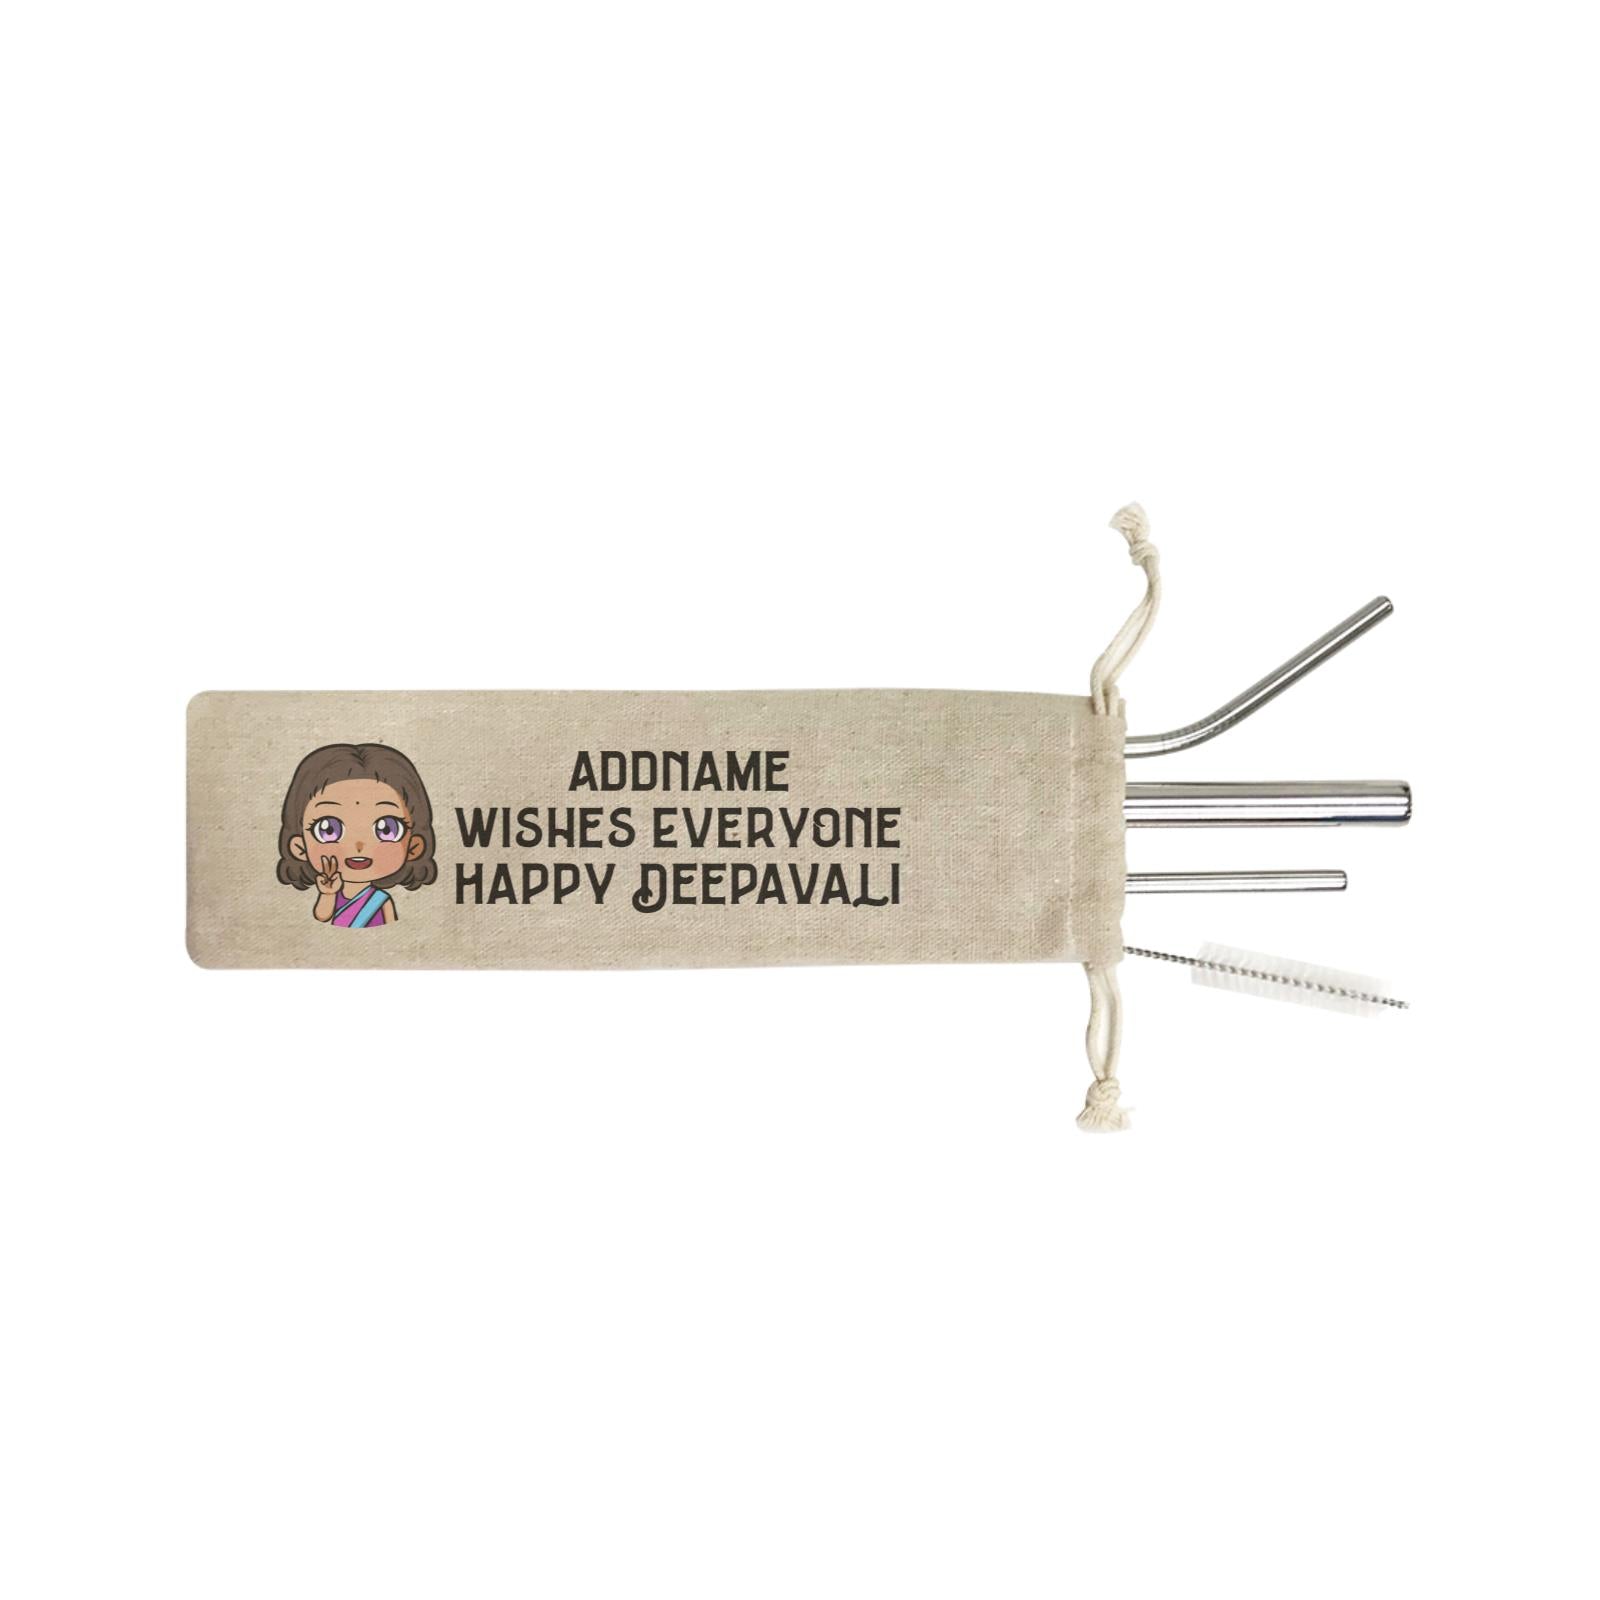 Deepavali Chibi Little Girl Front Addname Wishes Everyone Deepavali SB 4-In-1 Stainless Steel Straw Set in Satchel